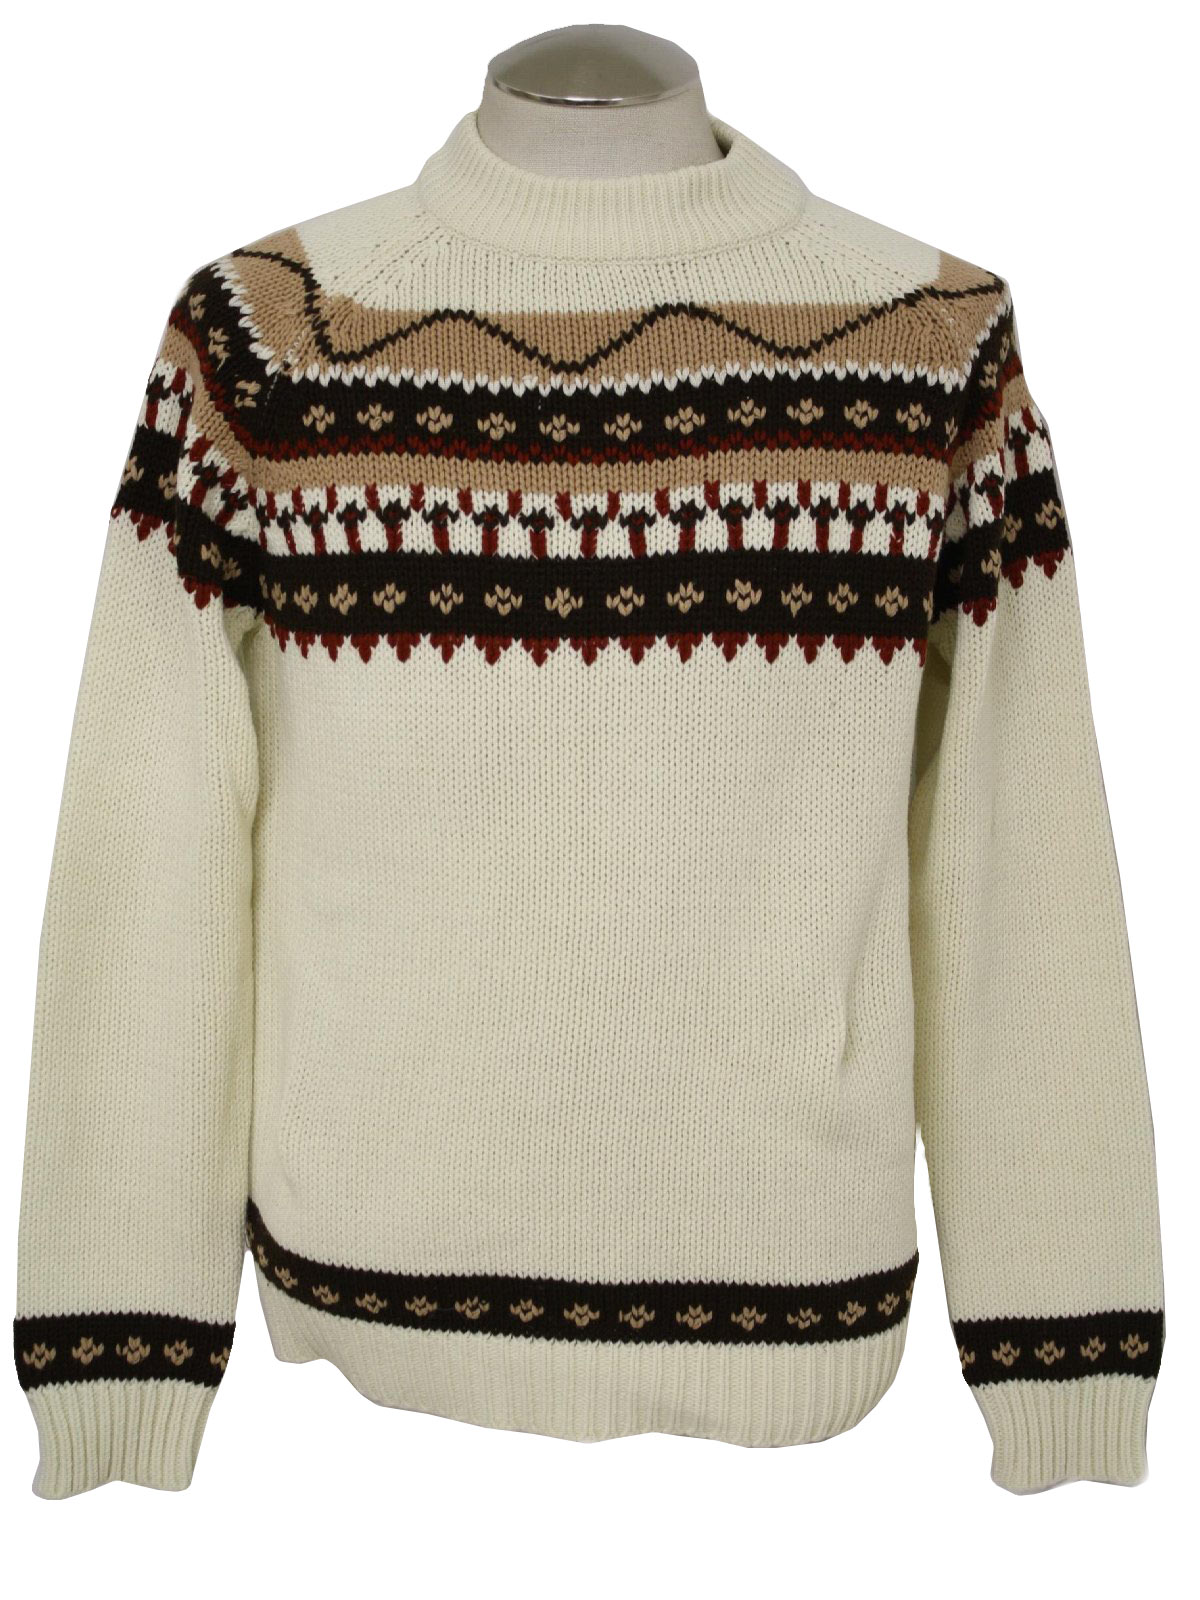 Retro Seventies Sweater: Early 70s -National Shirt Shops- Mens off ...